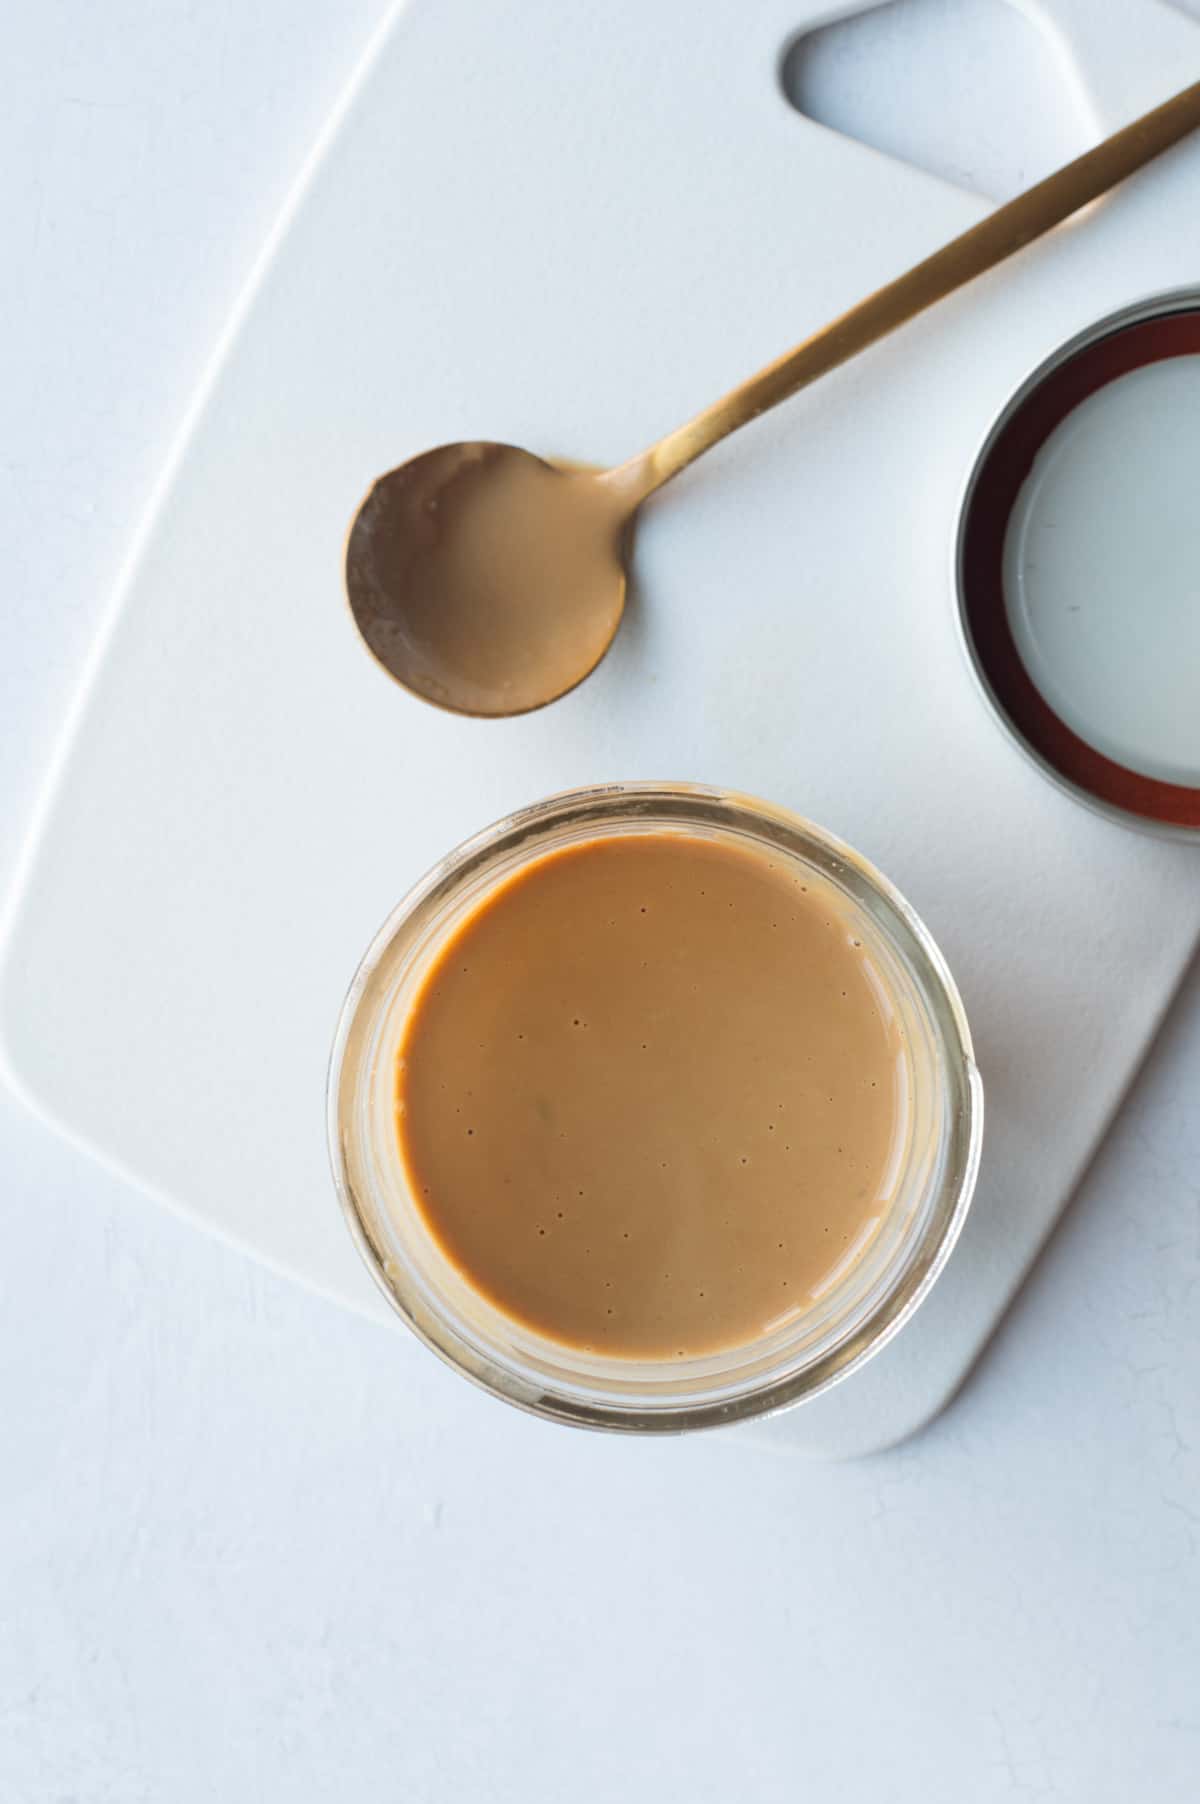 Healthy balsamic vinaigrette dressing in a glass storage jar next to a spoon with dressing.